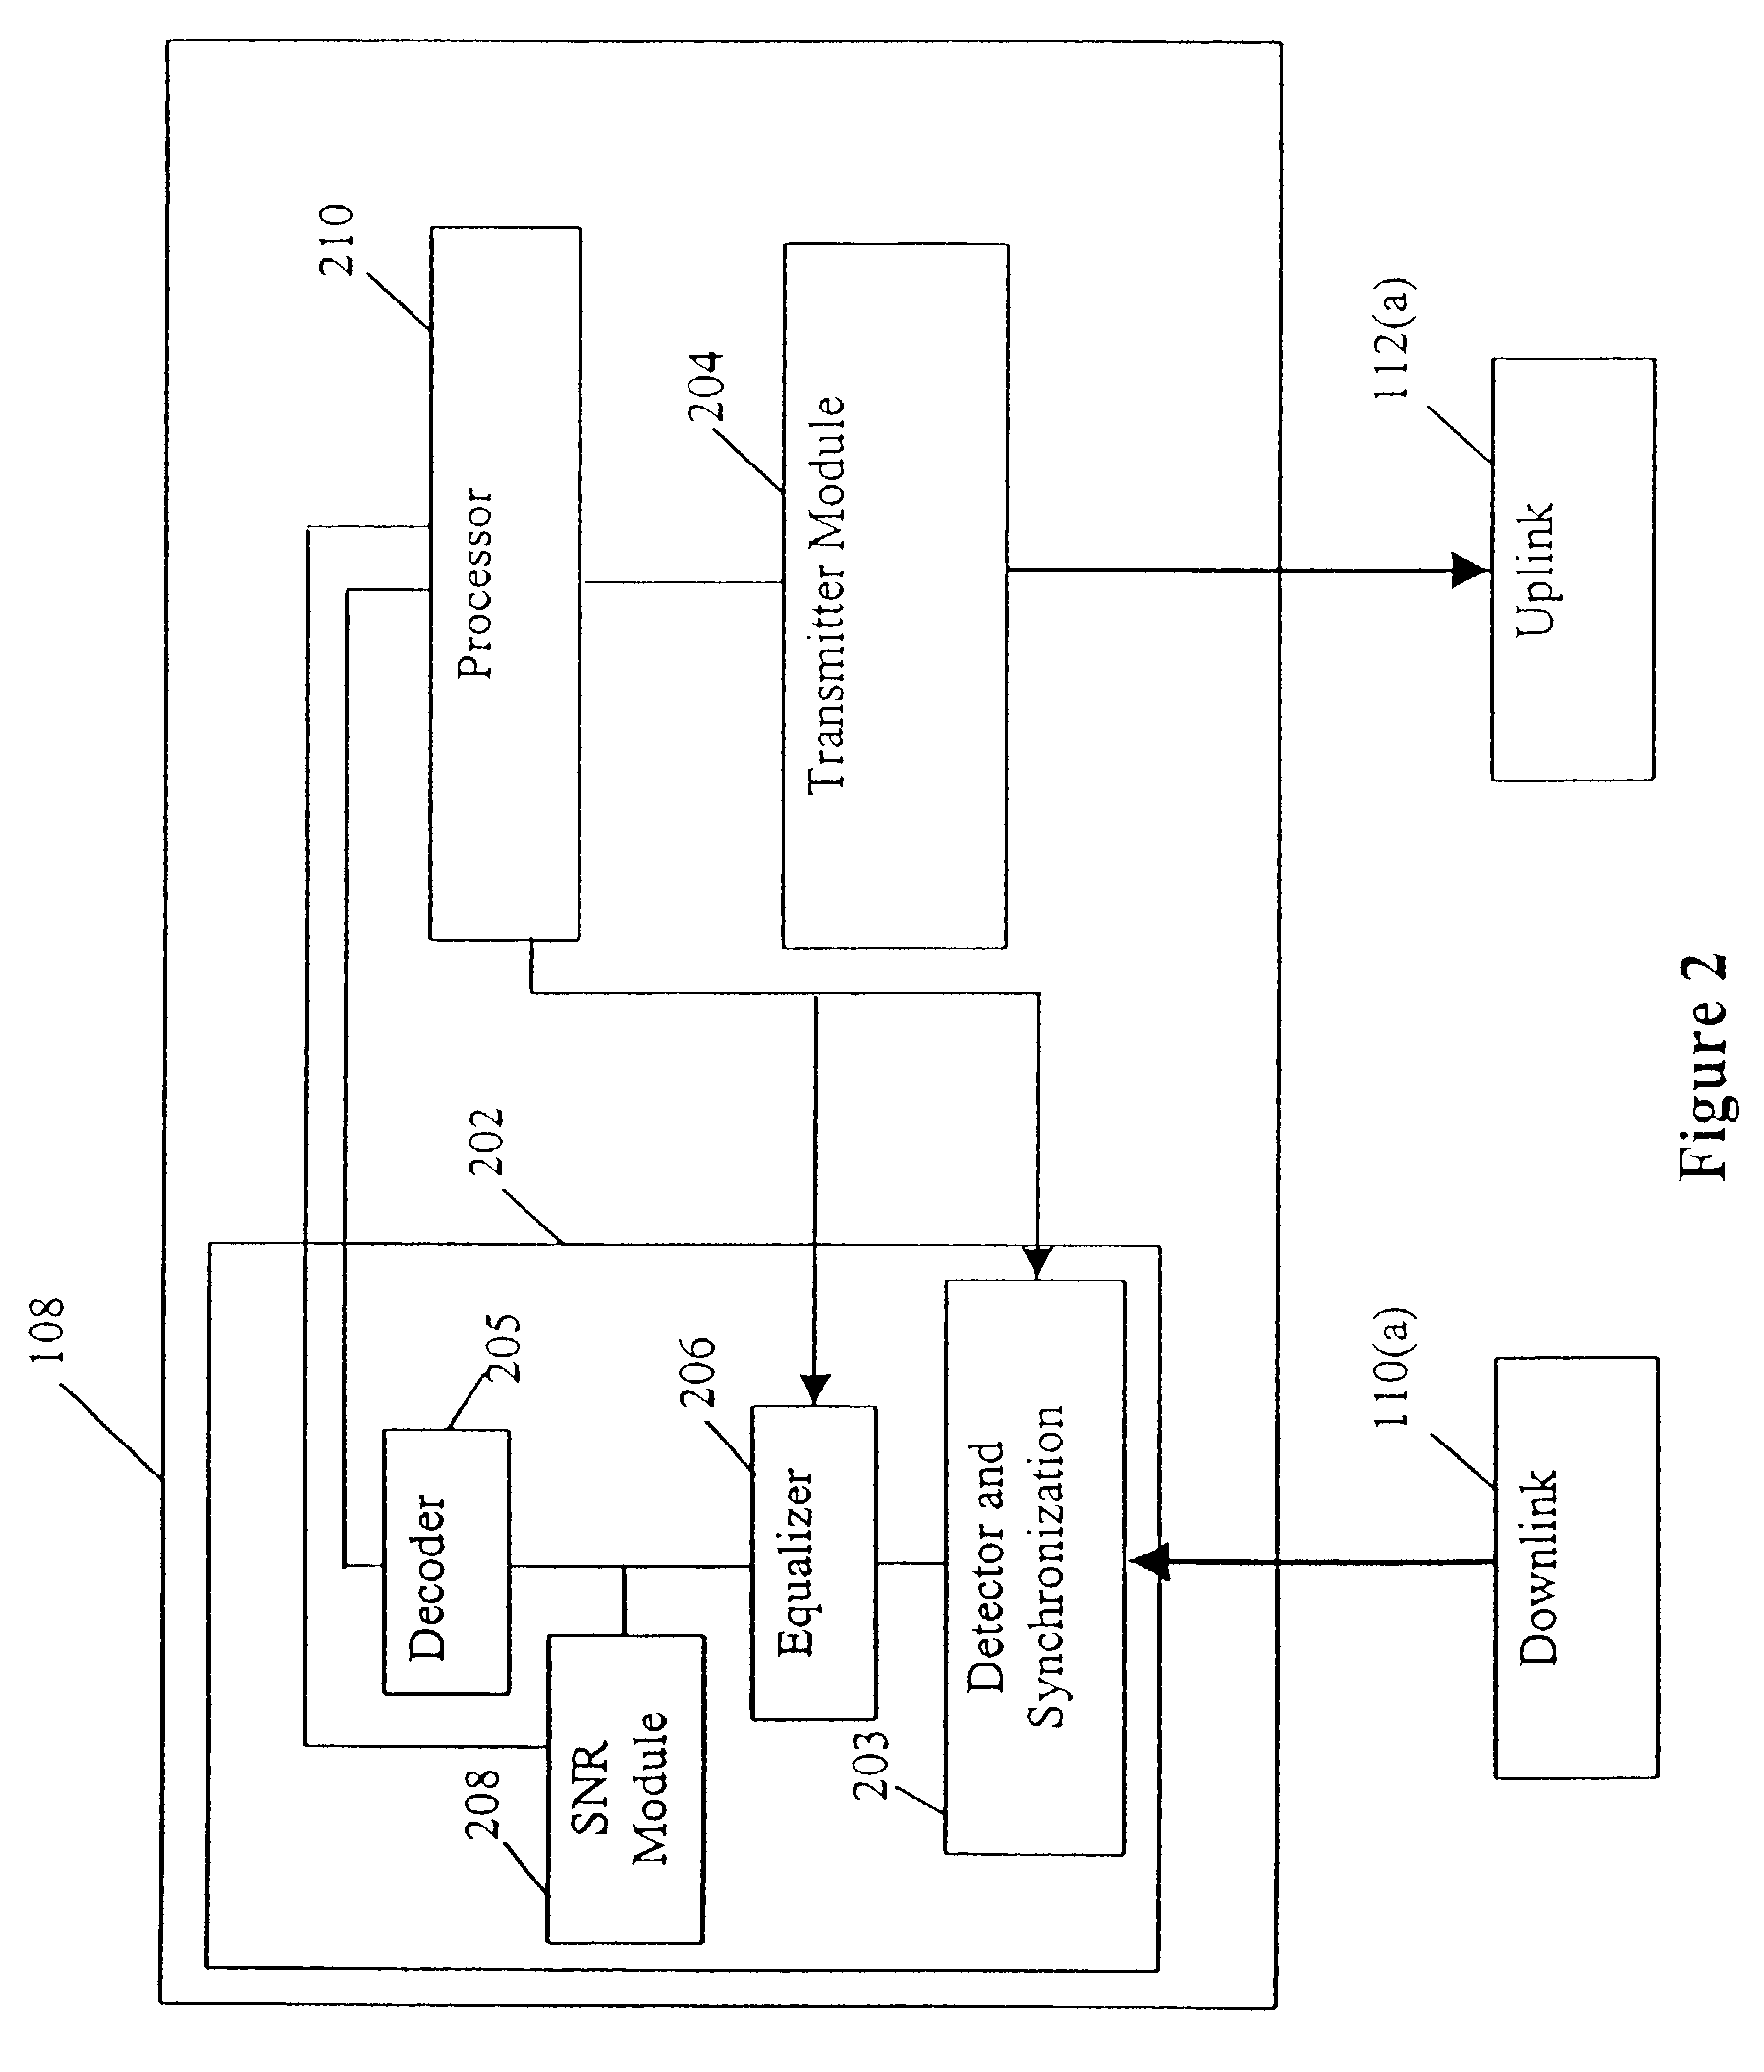 System and method for measuring signal to noise values in an adaptive wireless communication system